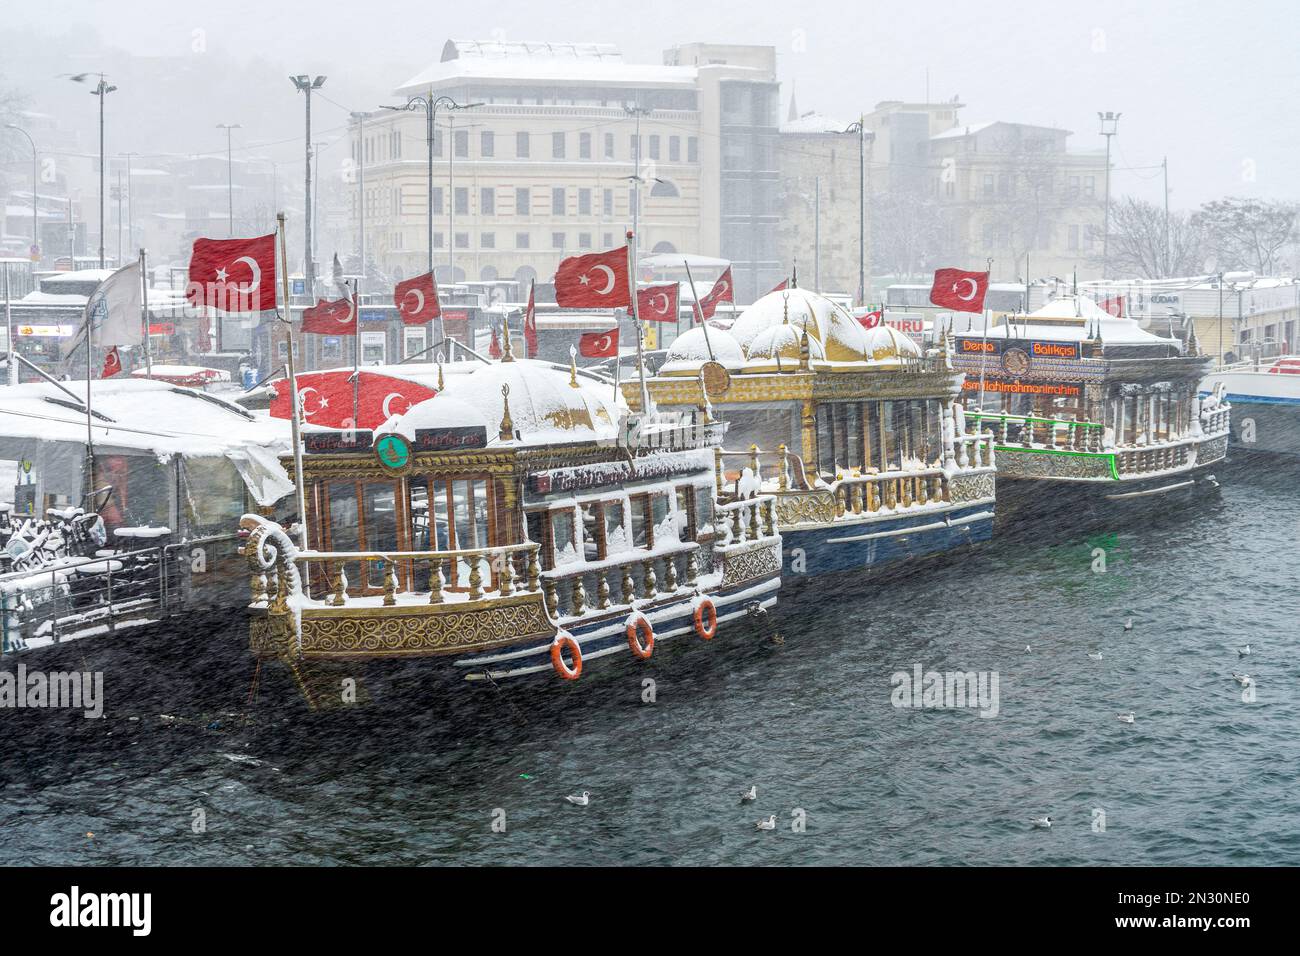 Snow-covered fish restaurants on boats on a winter day in Istanbul, Turkey. Stock Photo